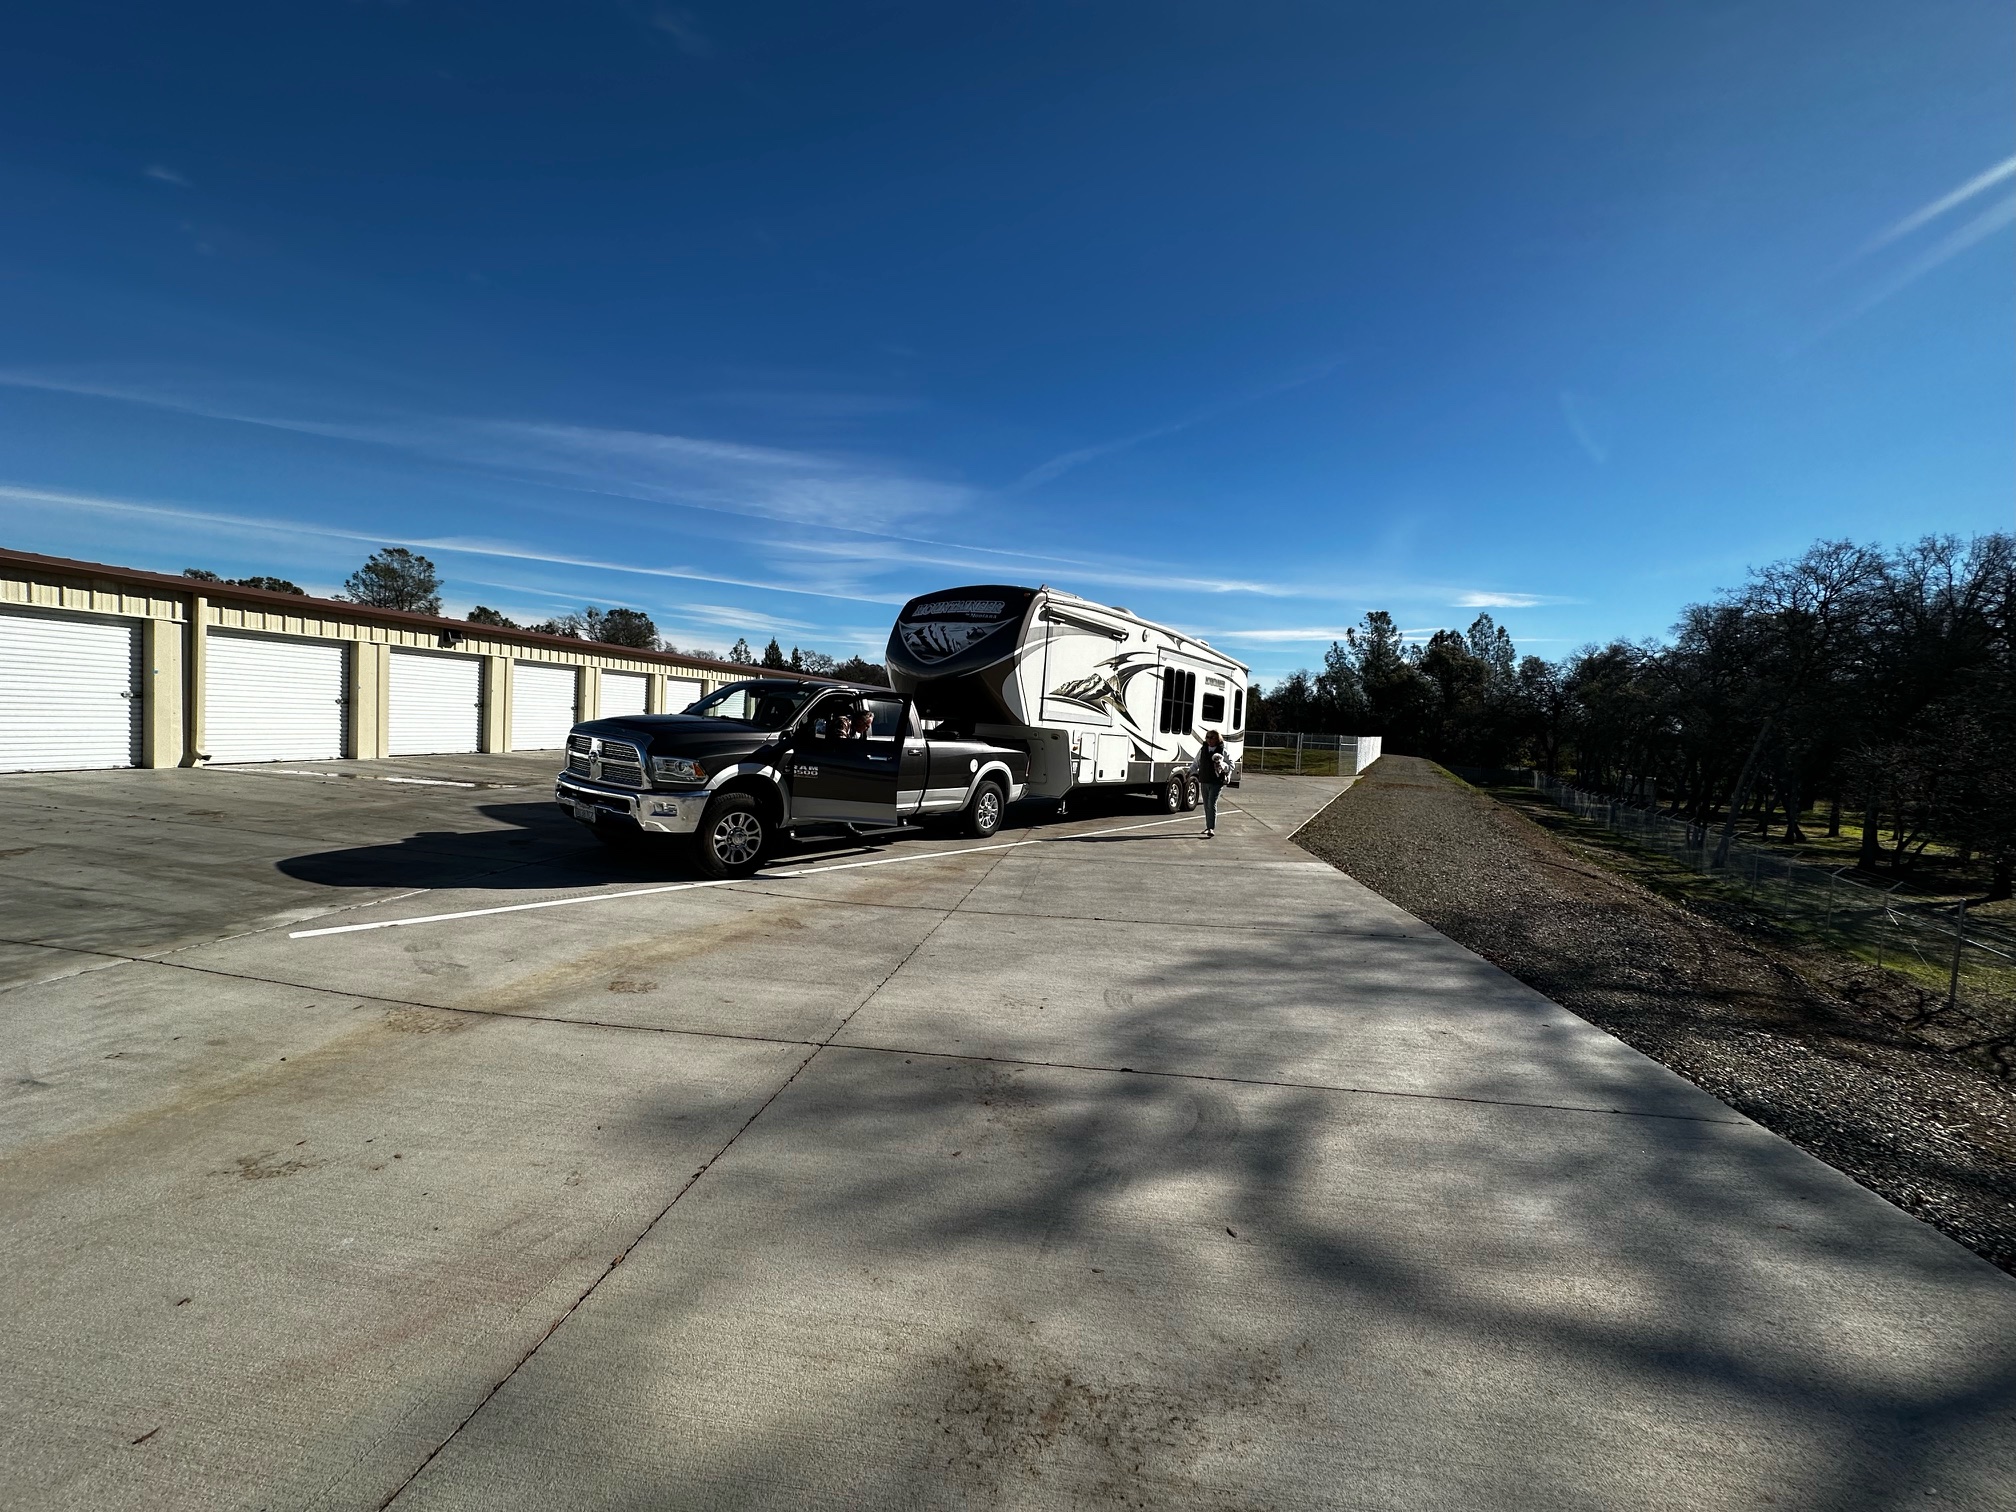 Leave It To Us Storage - Camerson Park CA 95682